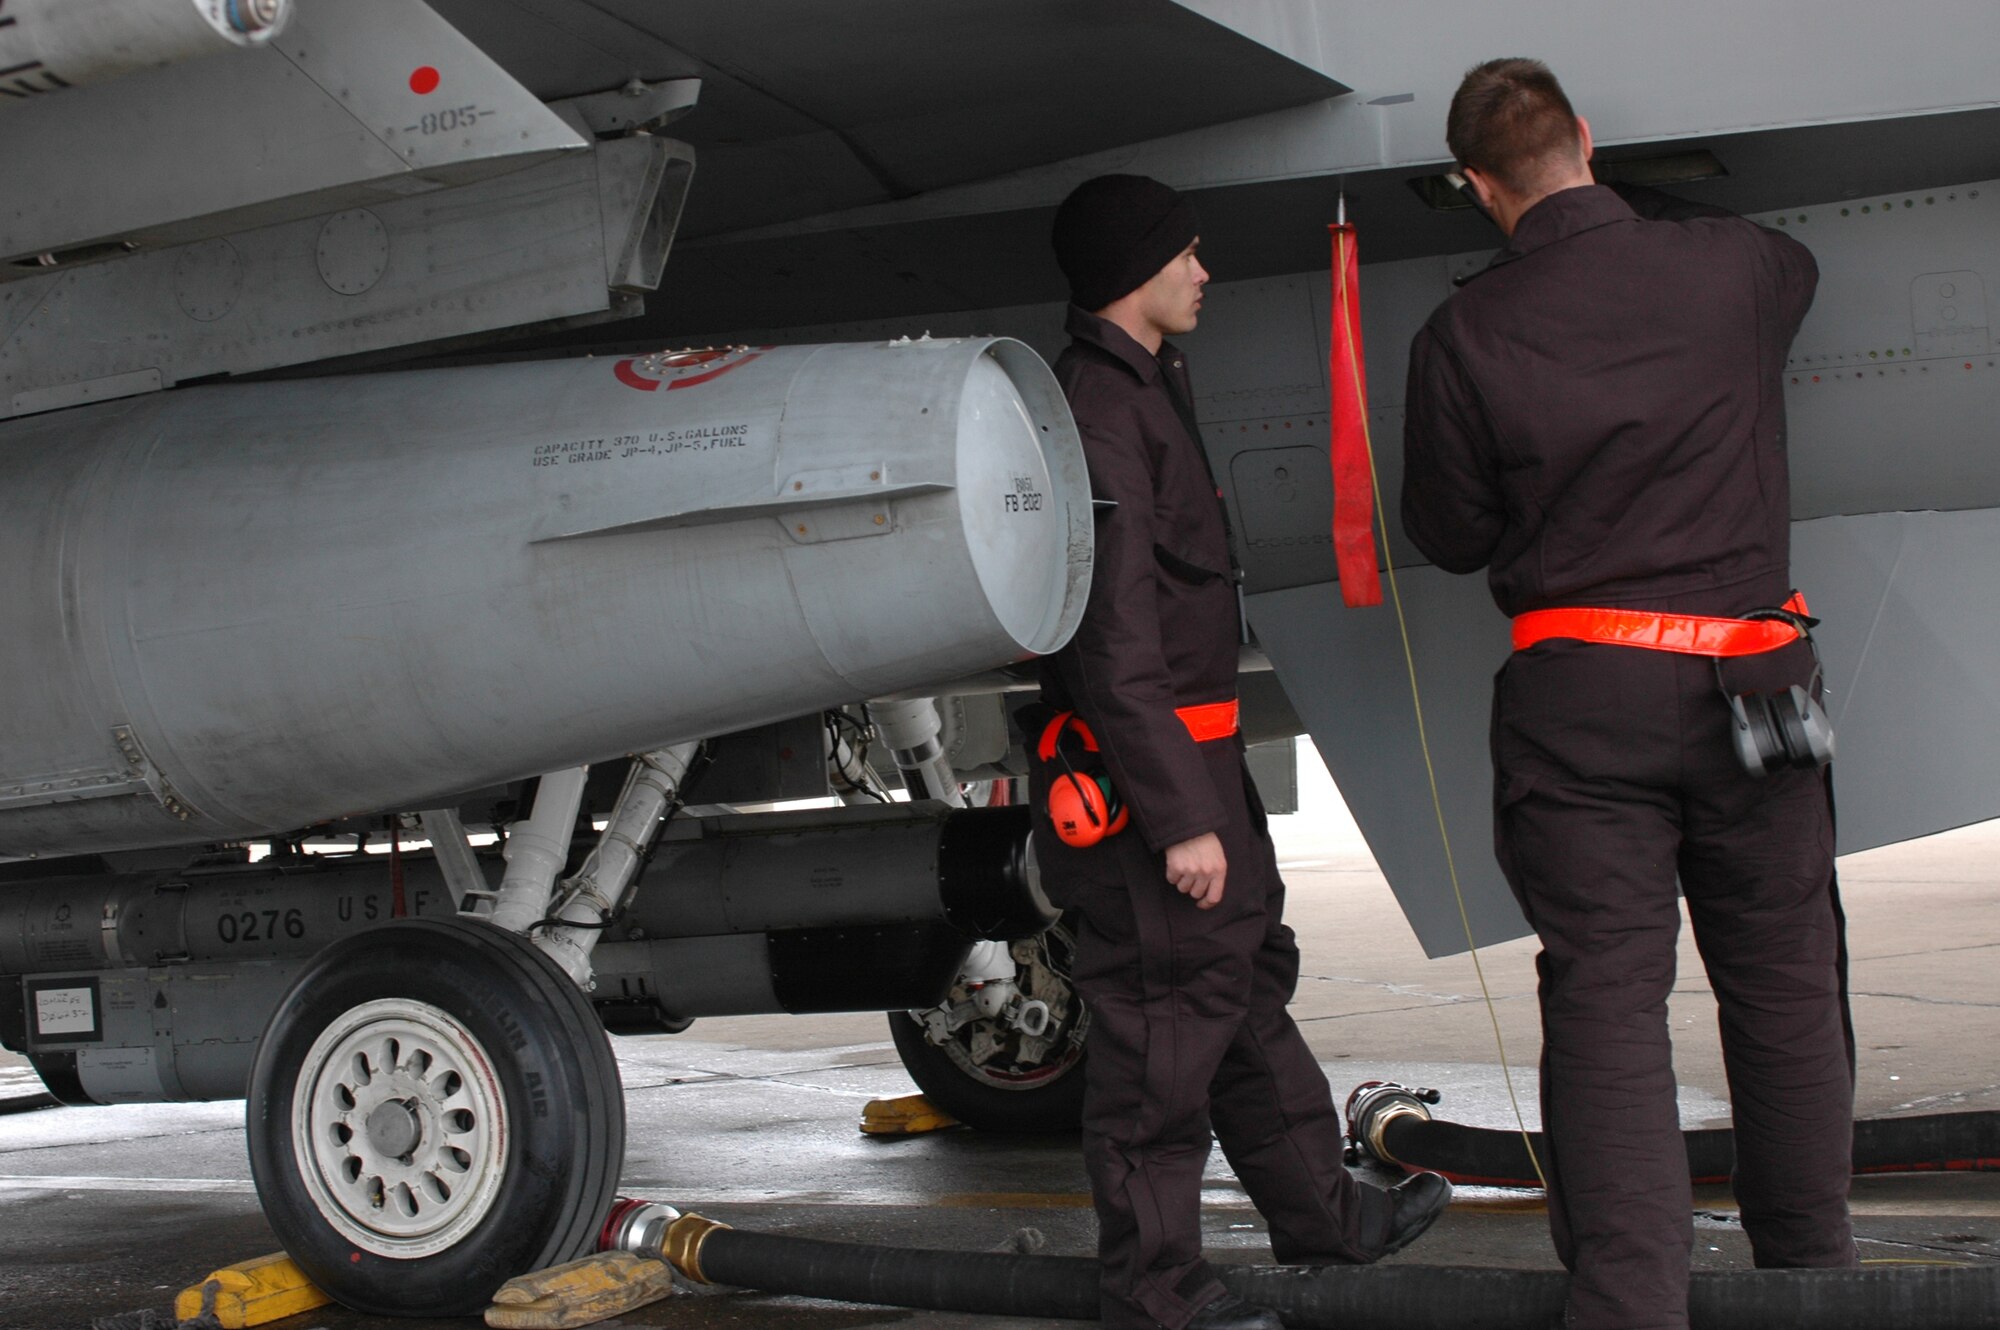 Senior Airman Jereamy Day and Airman 1st Class Corey Brillinger, both crew chiefs in the 388th Aircraft Maintenance Squadron, work to install a chaff and flare dispensar in an F-16.  In November 2007, the 388th AMXS was recognized with Air Combat Command's mid-sized Maintenance Effectiveness Award.  (Photo by 1st Lt. Beth Woodward)